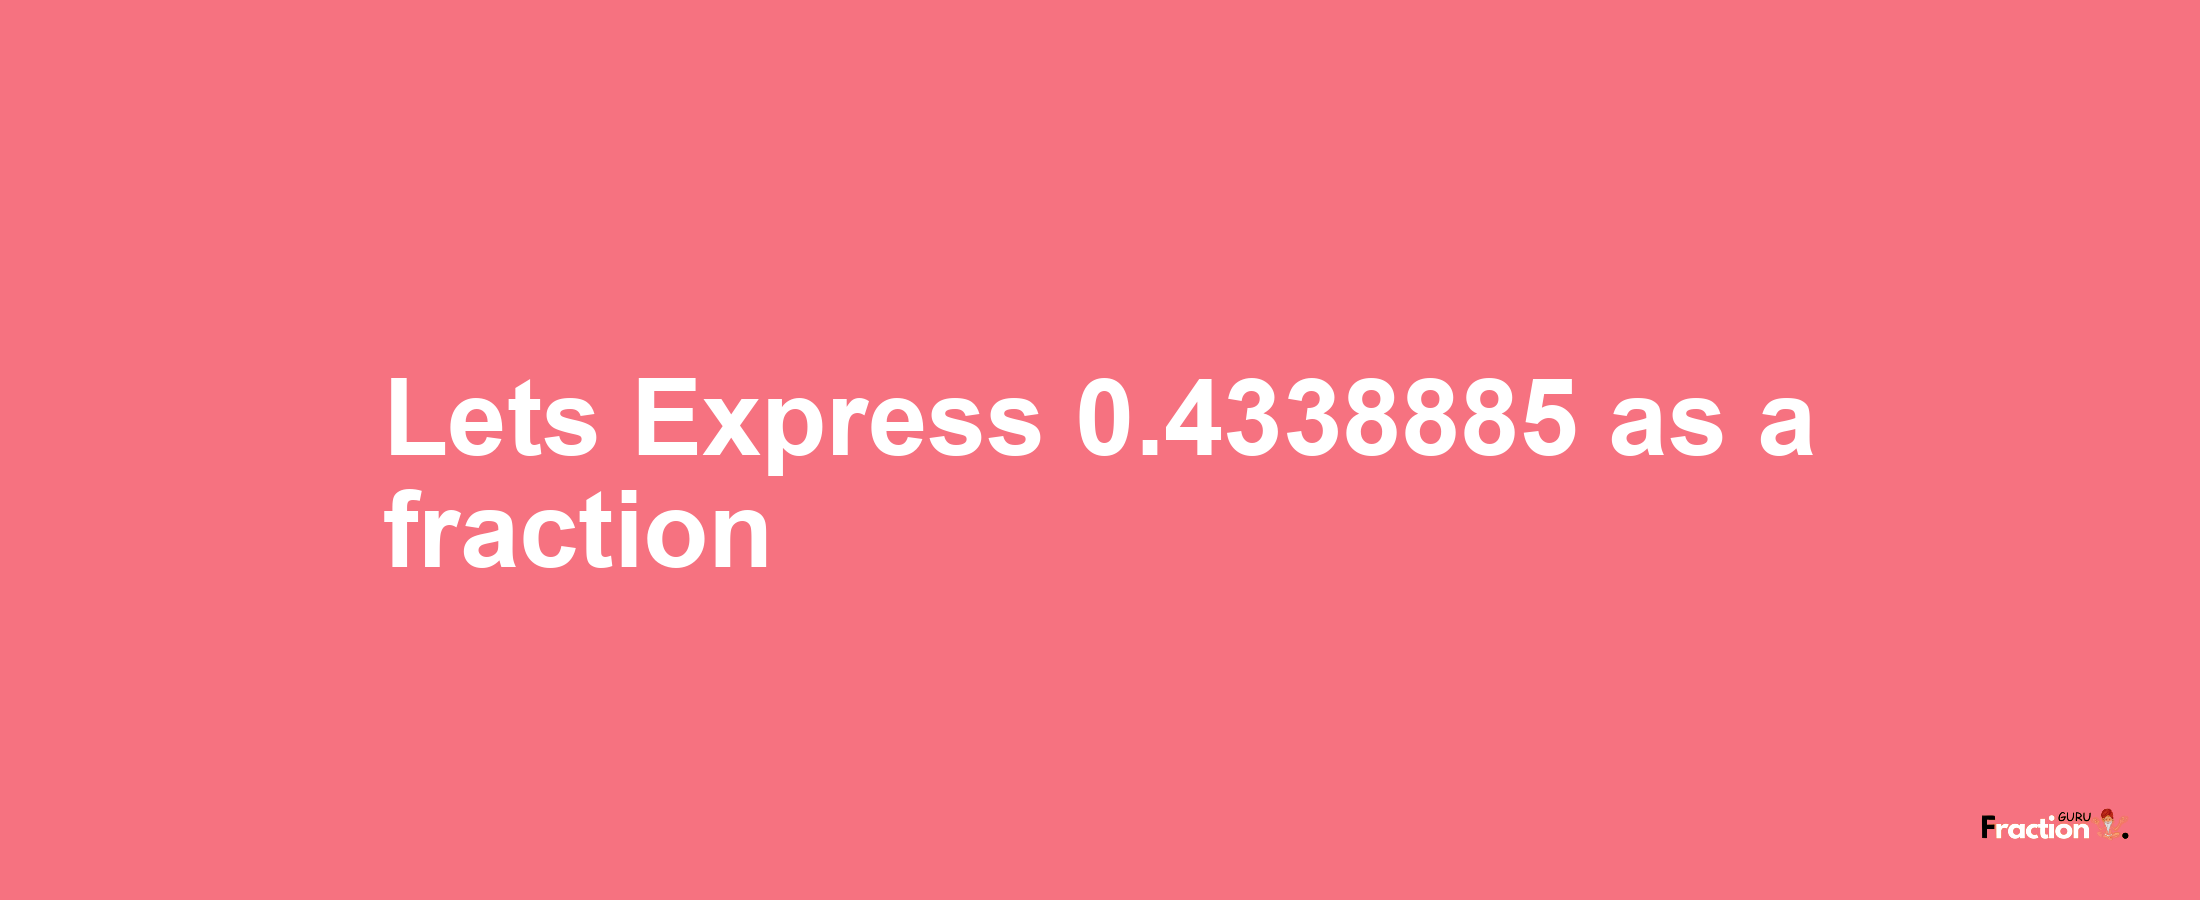 Lets Express 0.4338885 as afraction